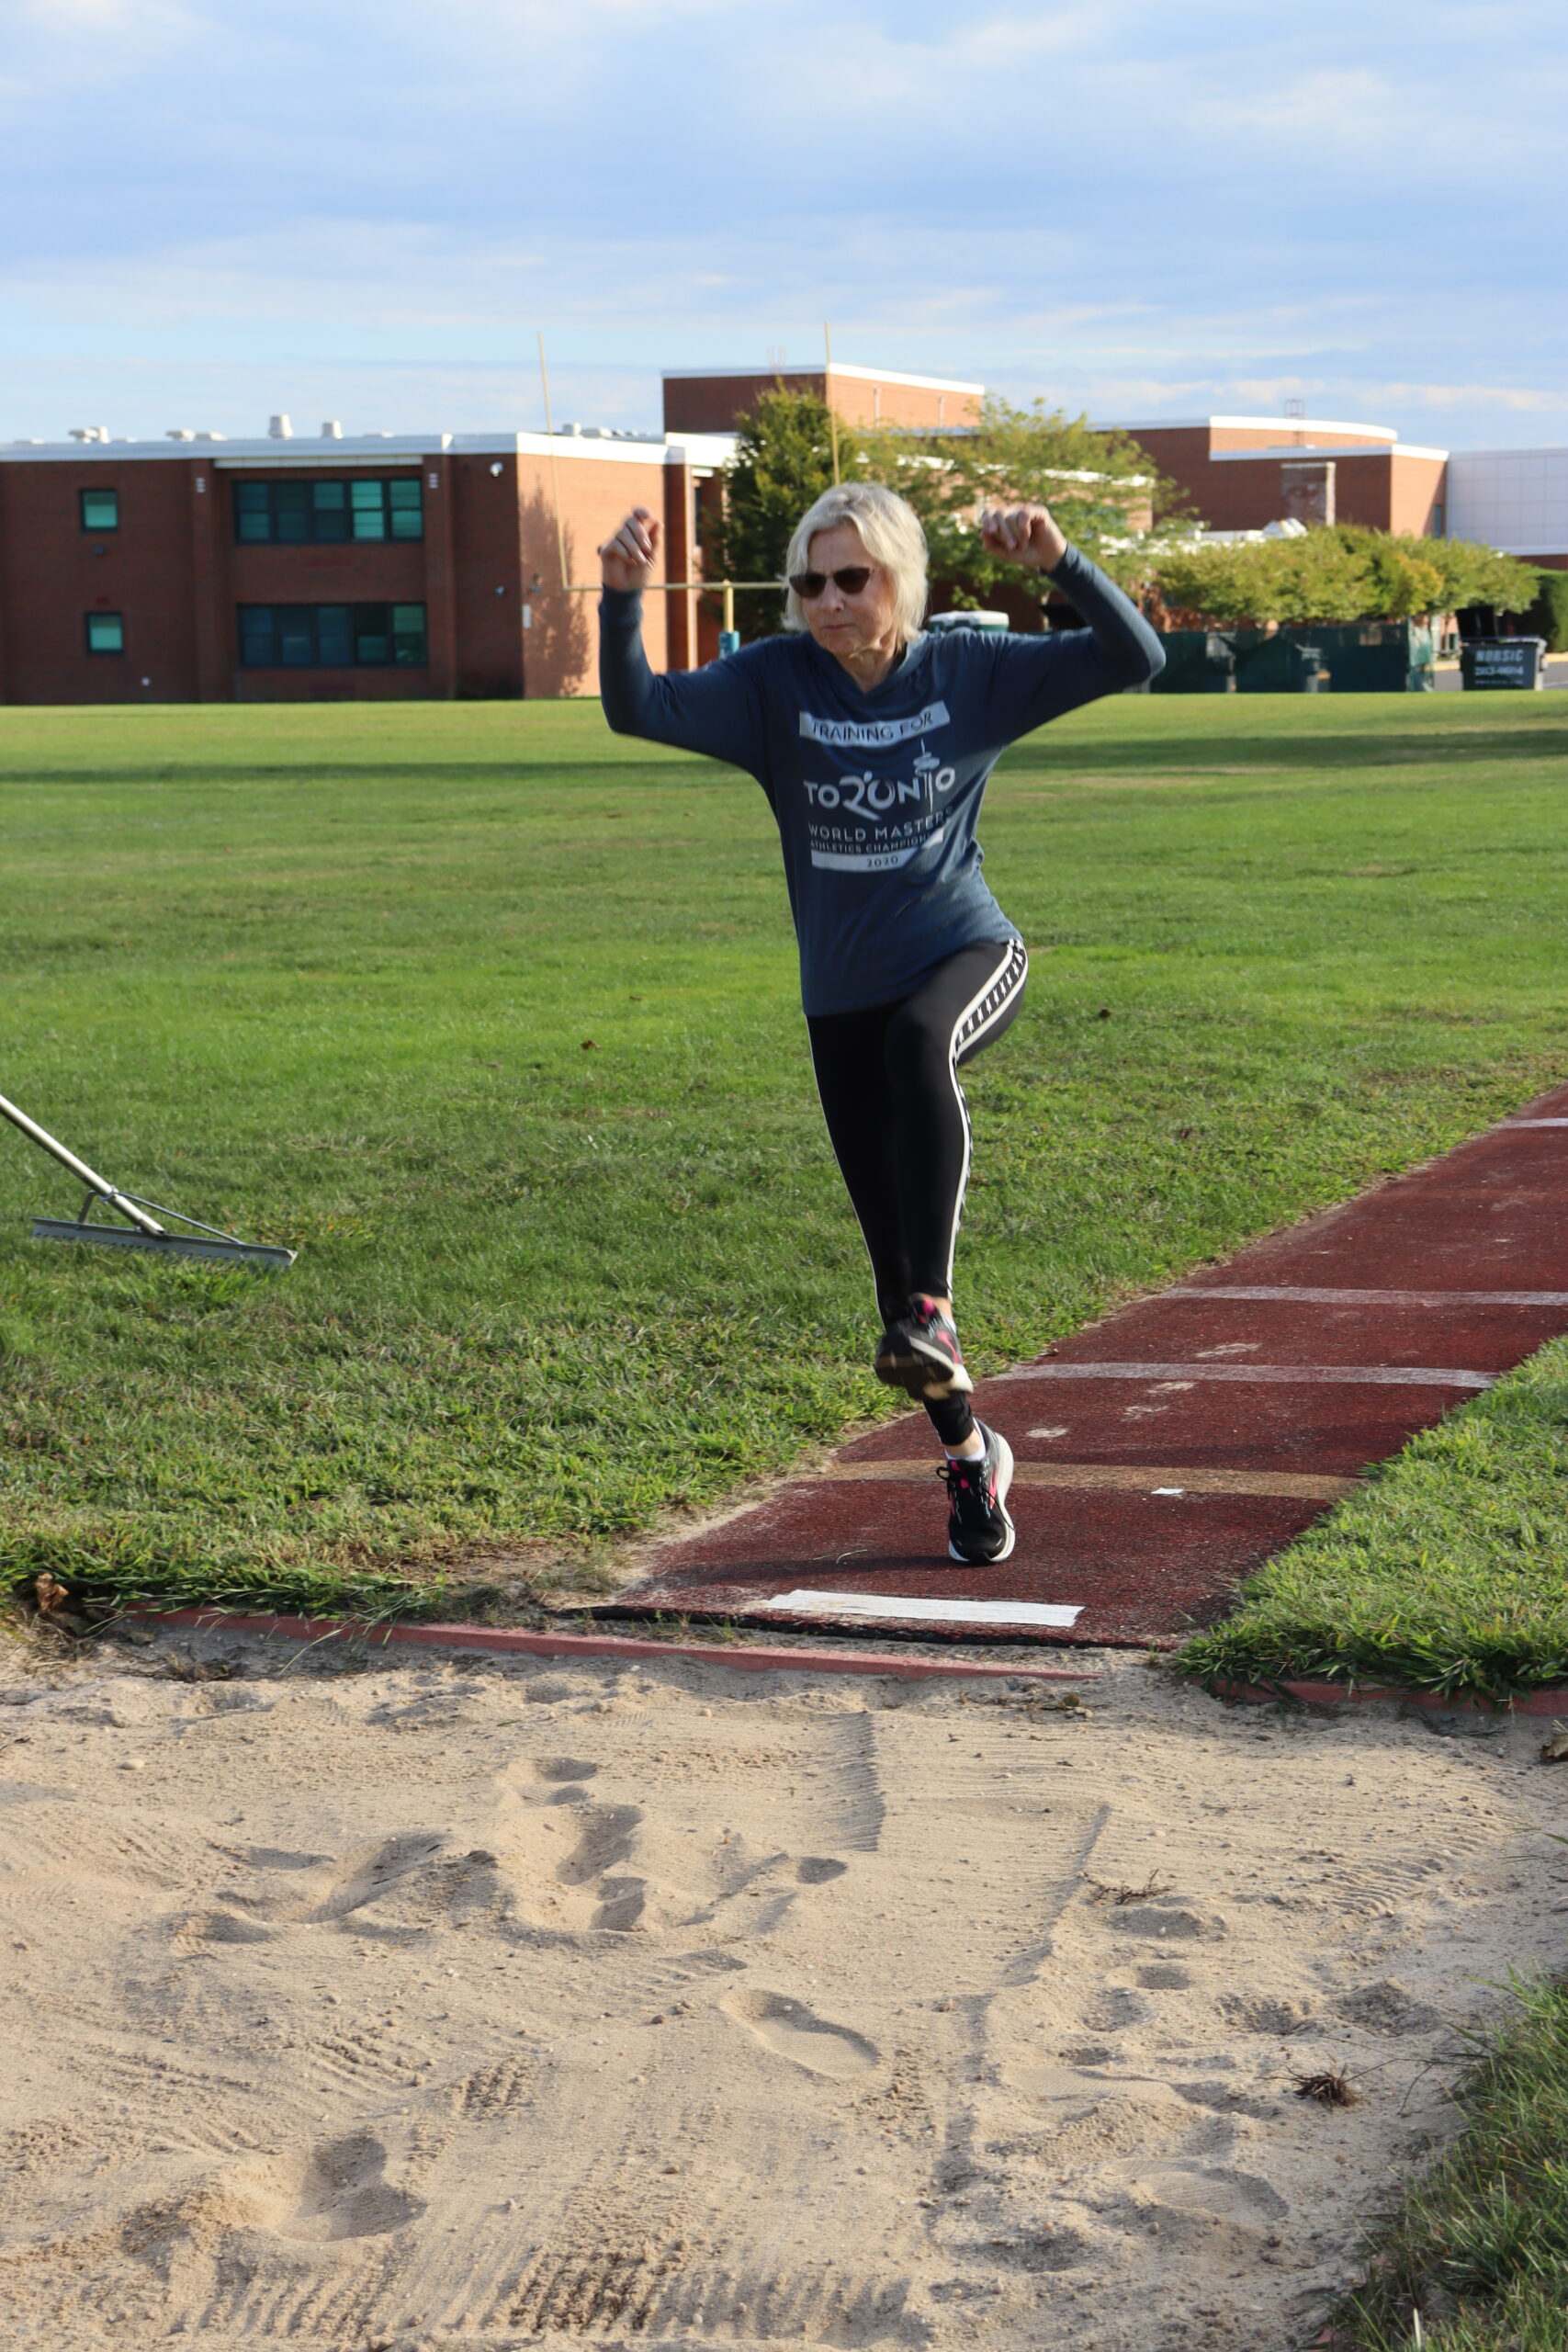 Quogue resident, a self-described lifelong track and field 